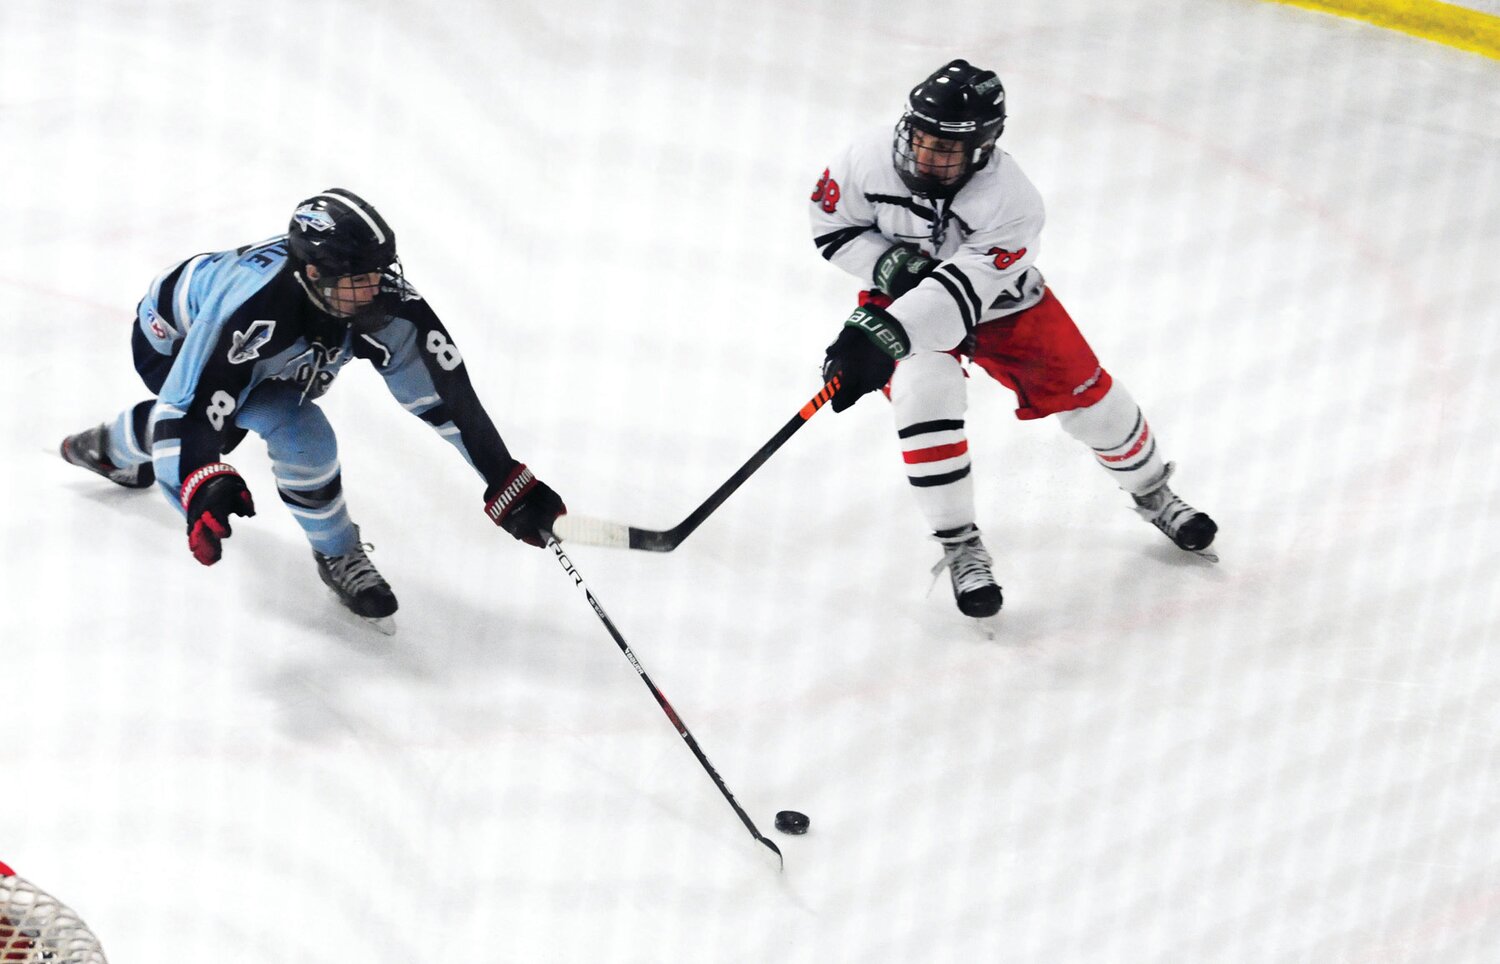 Corey Kosick, right, controls the puck for CB East in Feb. 2 duel with North Penn. James Boyle defends for the Knights.